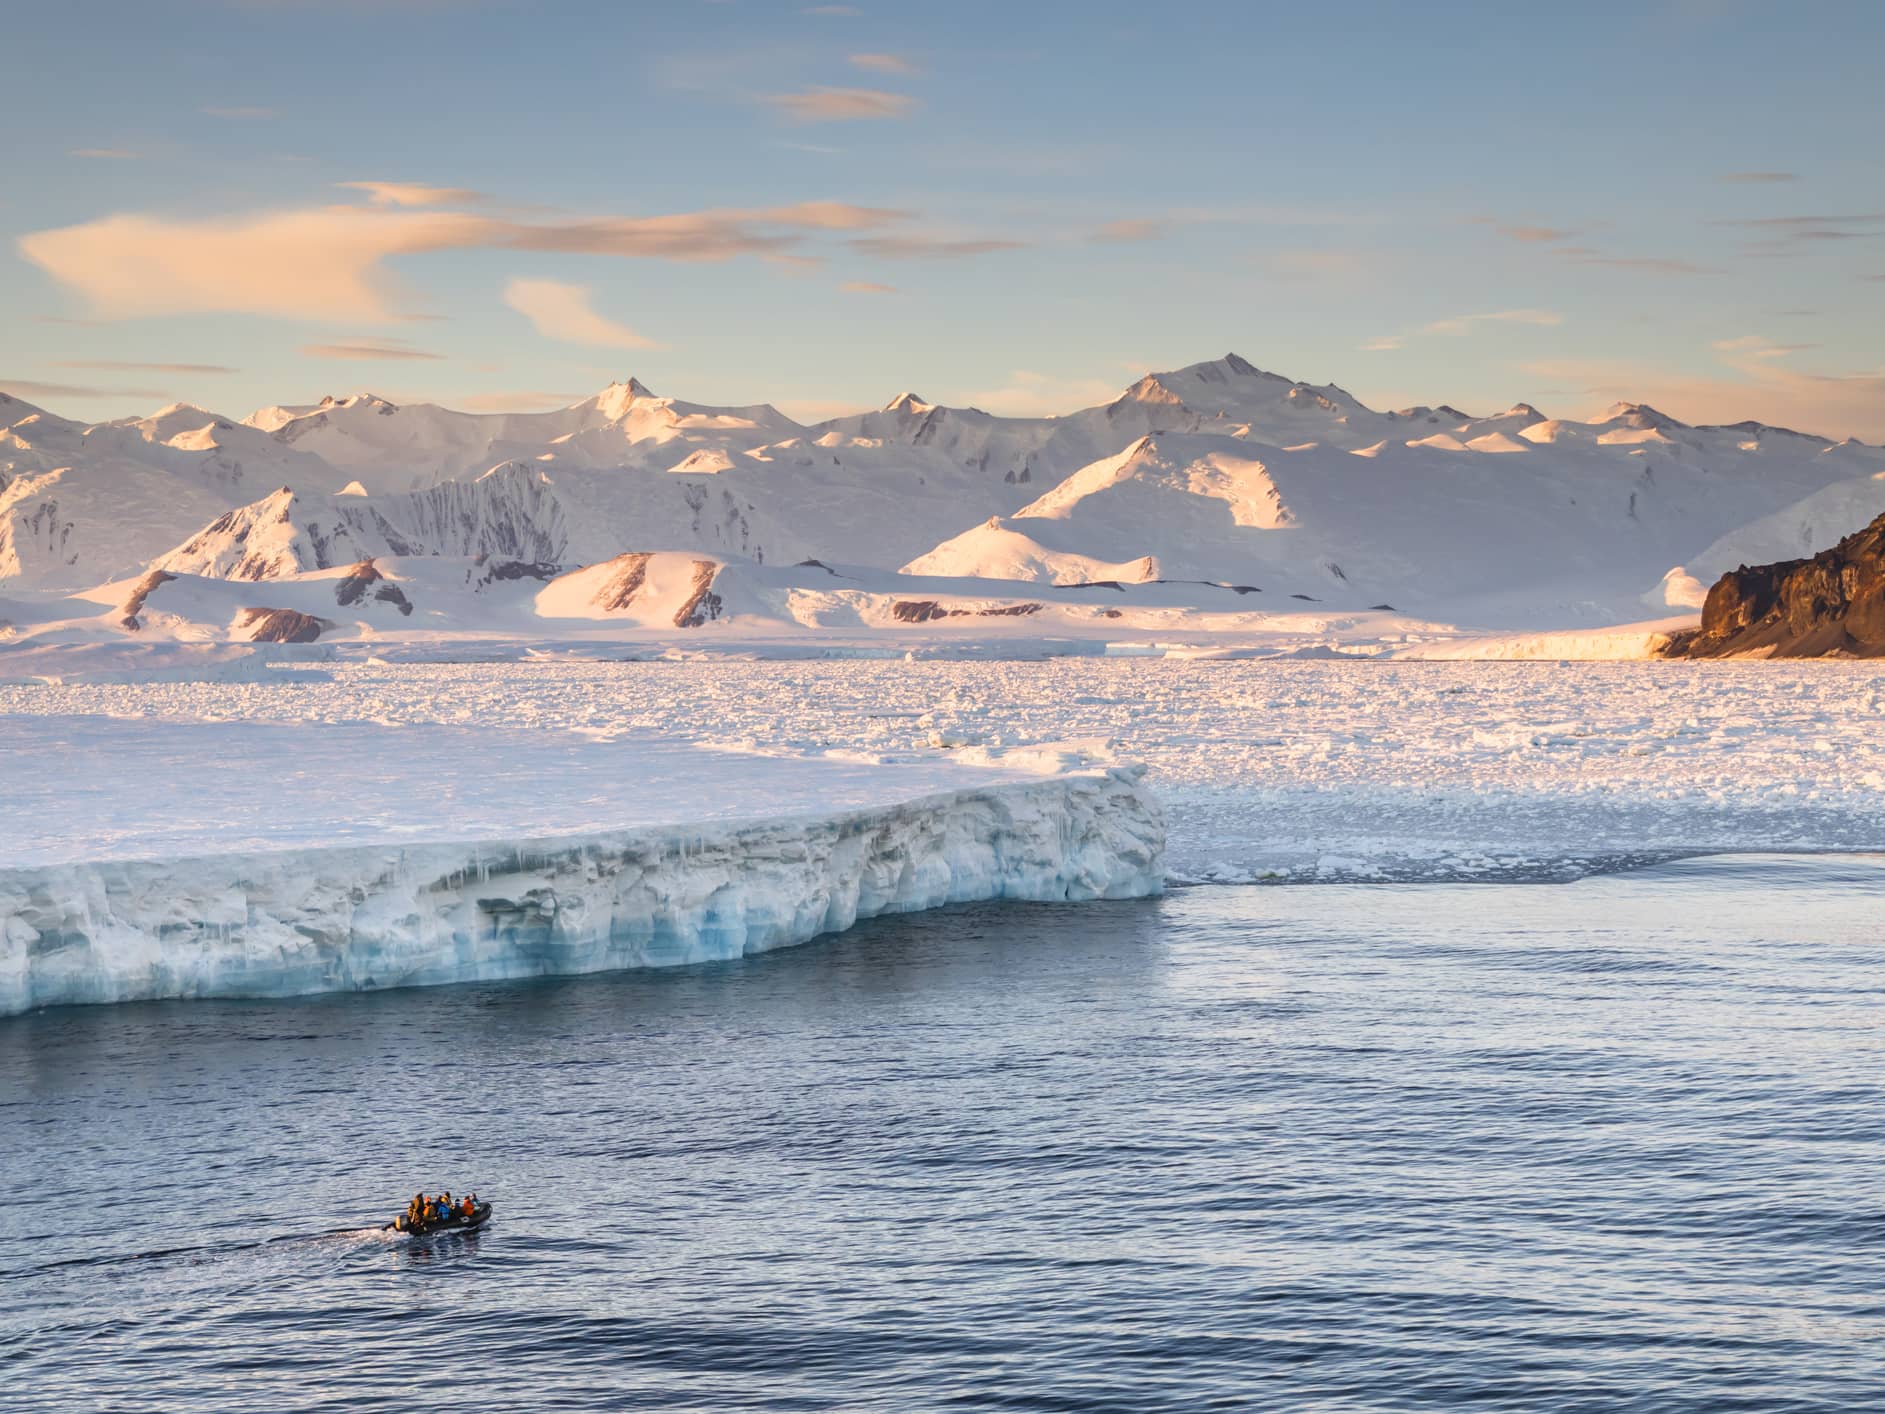  Embark on an unforgettable Antarctic expedition  